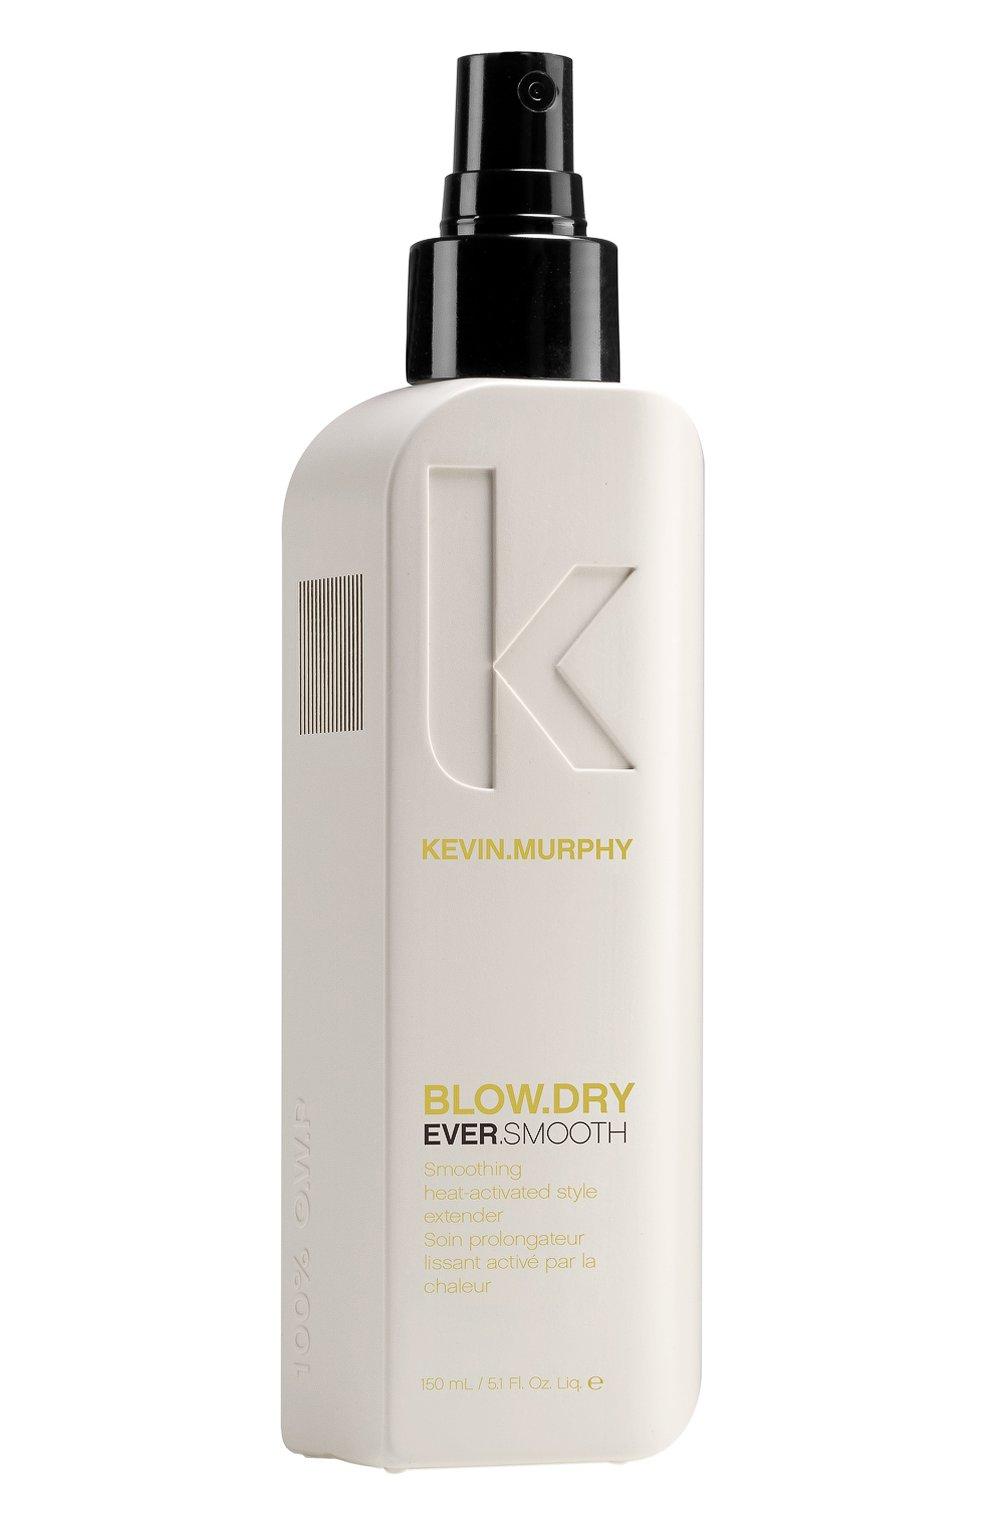 KEVIN.MURPHY ever.smooth blow.dry